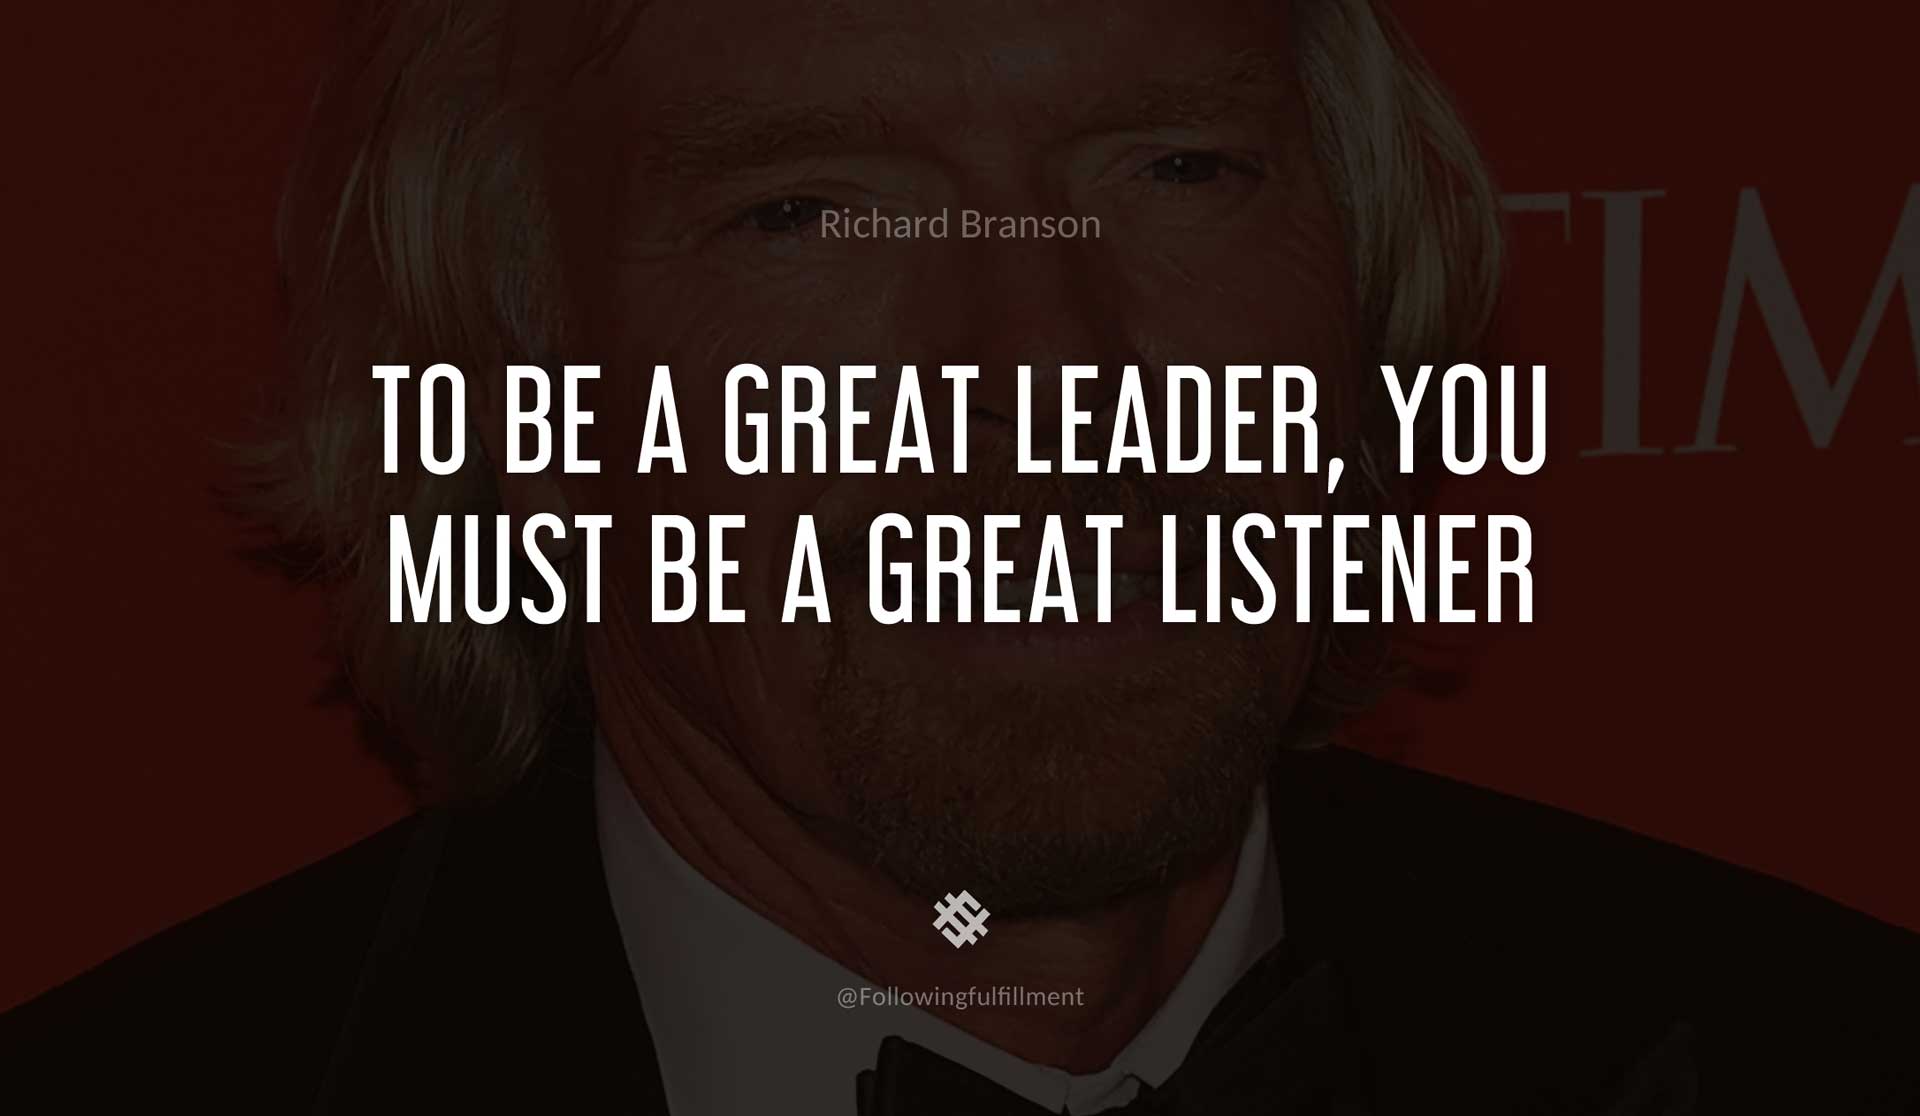 To-be-a-great-leader,-you-must-be-a-great-listener-RICHARD-BRANSON-Quote.jpg